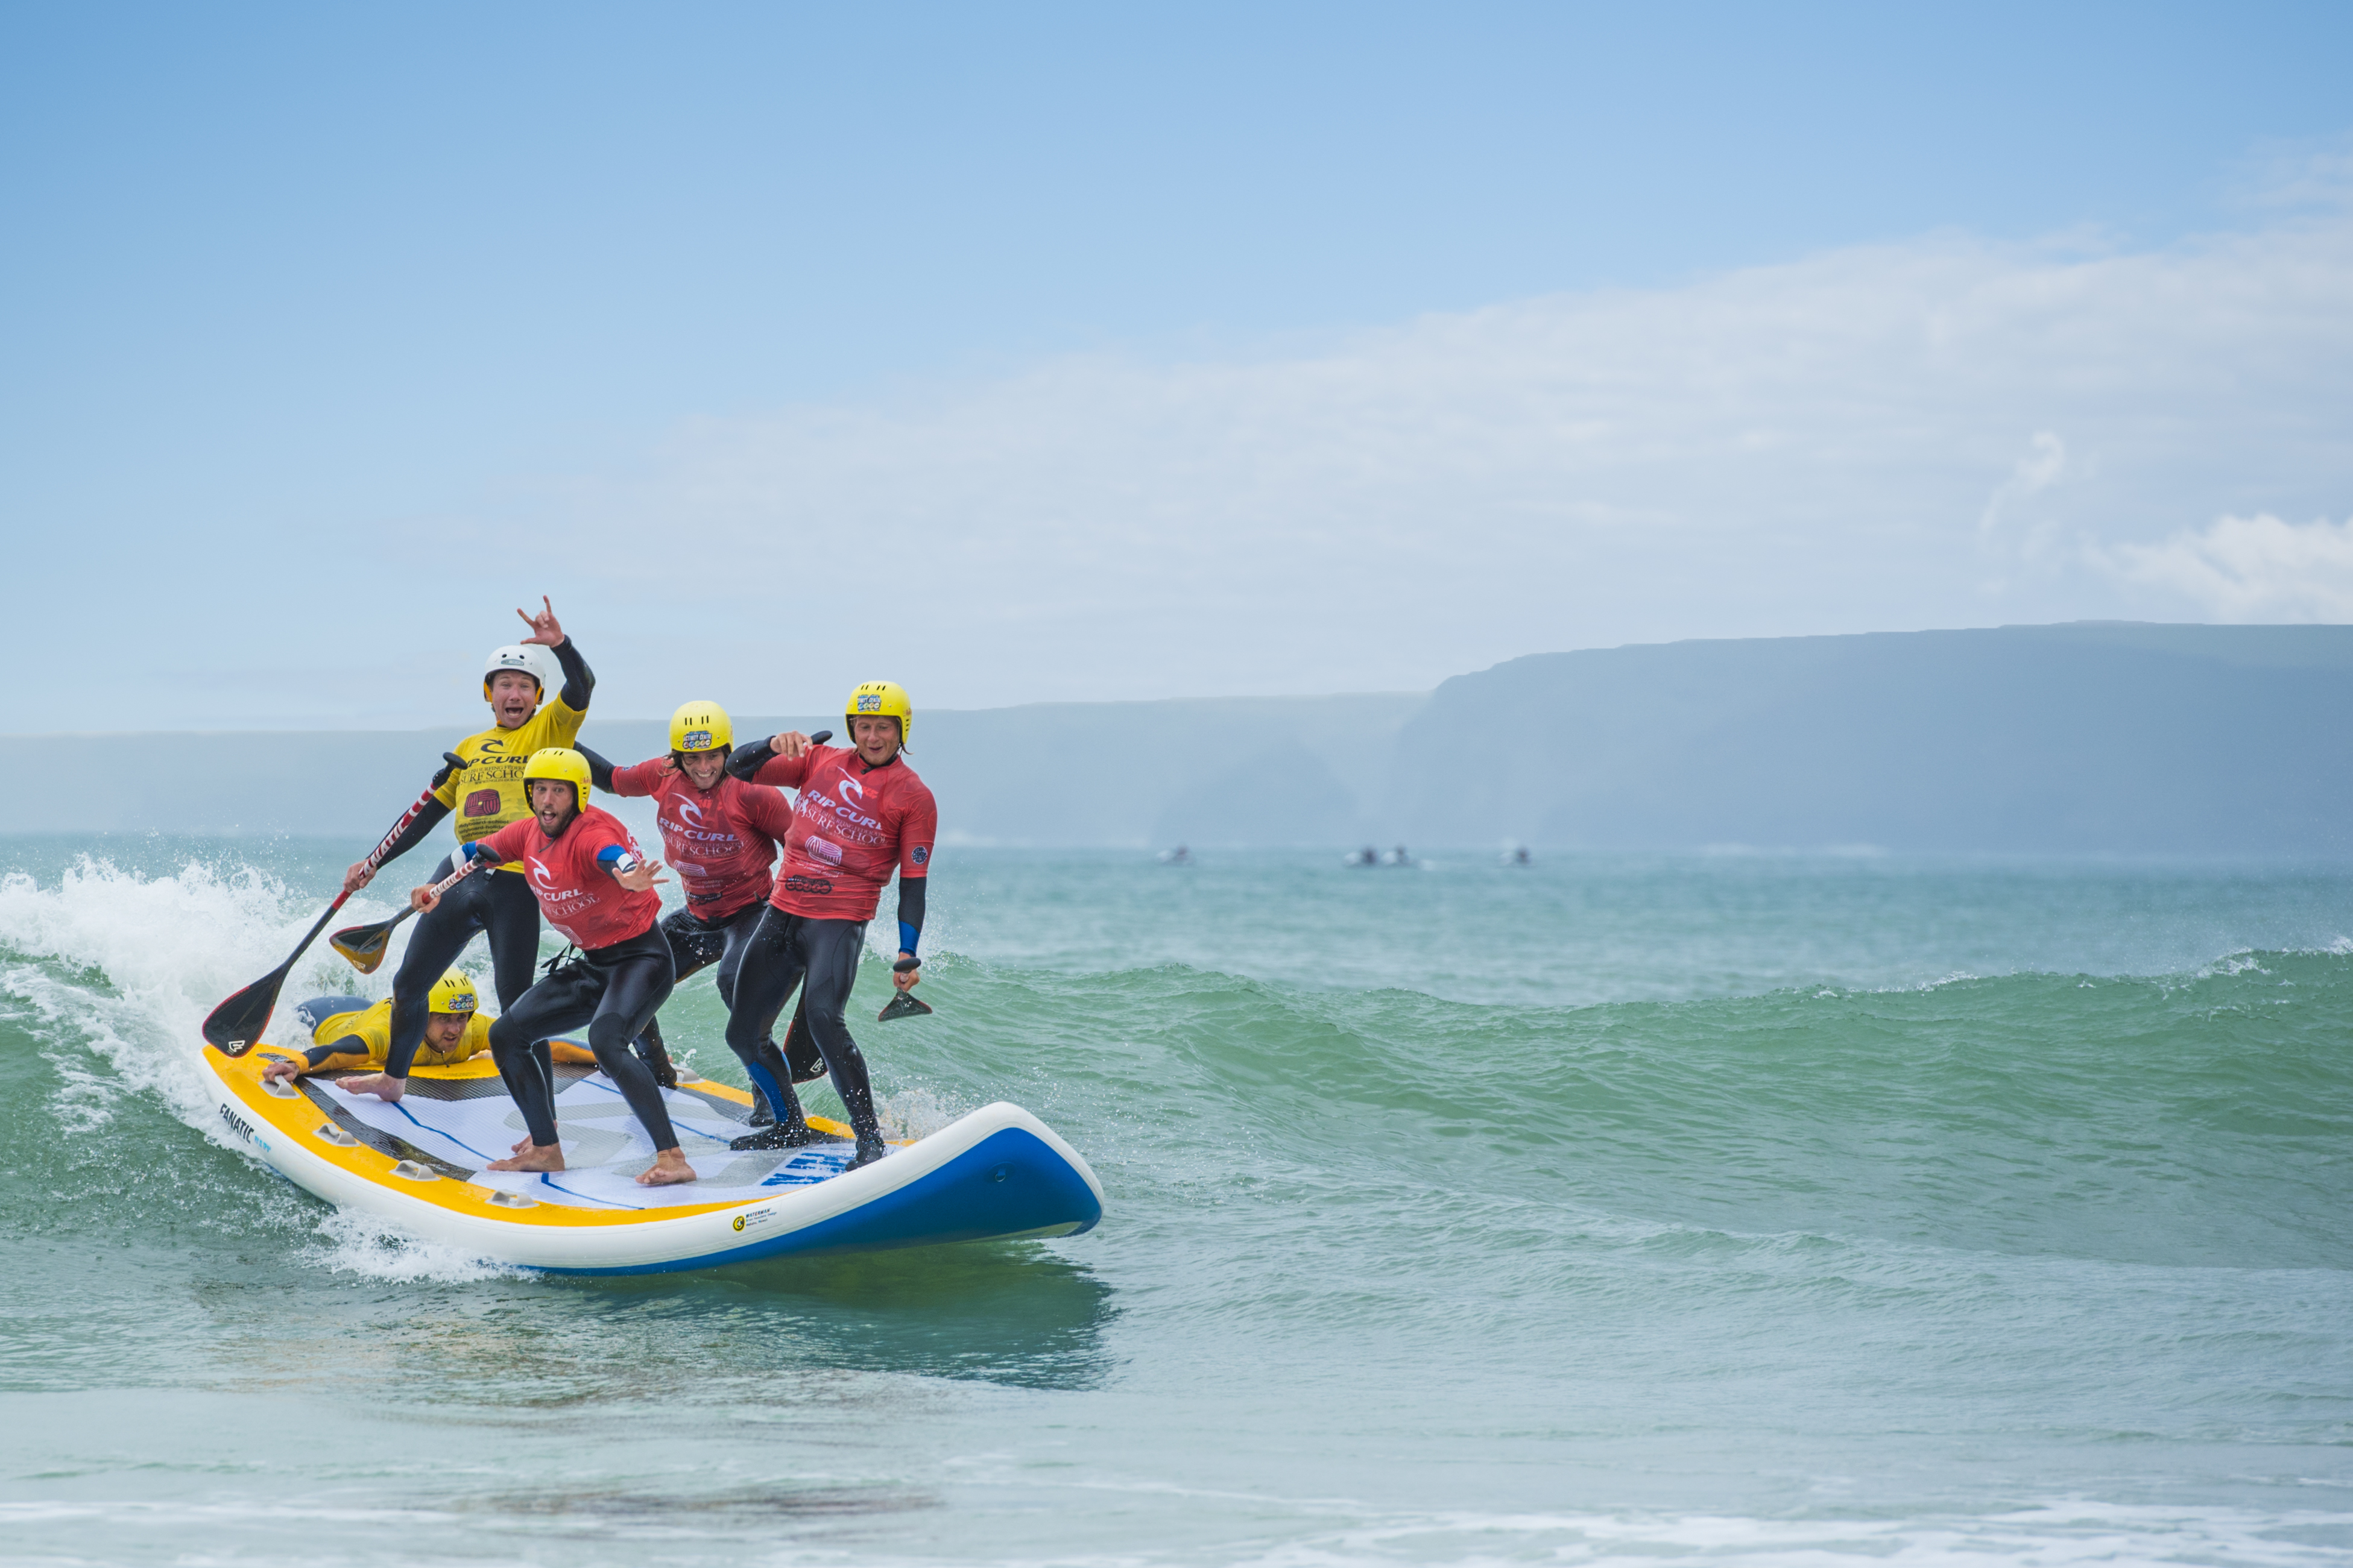 Giant SUP in Newquay is a lot of fun for small groups
